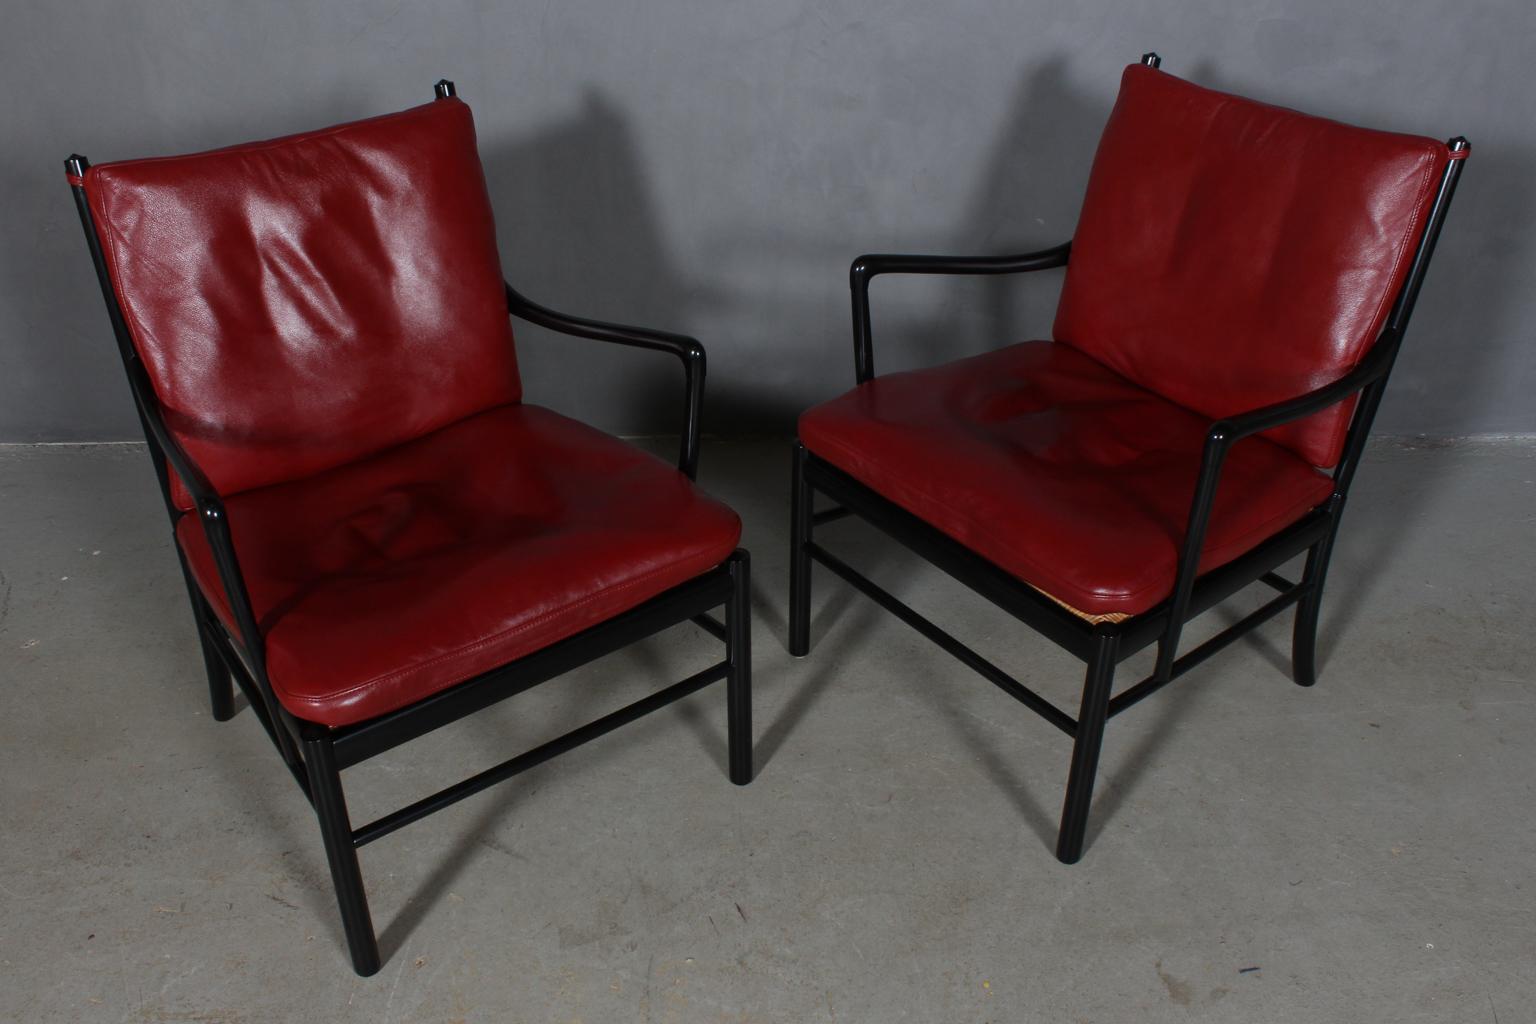 Ole Wanscher pair of lounge chairs new original upholstered with wine red leather.

Original black laquered.

Model colonial chair, made by Poul Jeppesen.